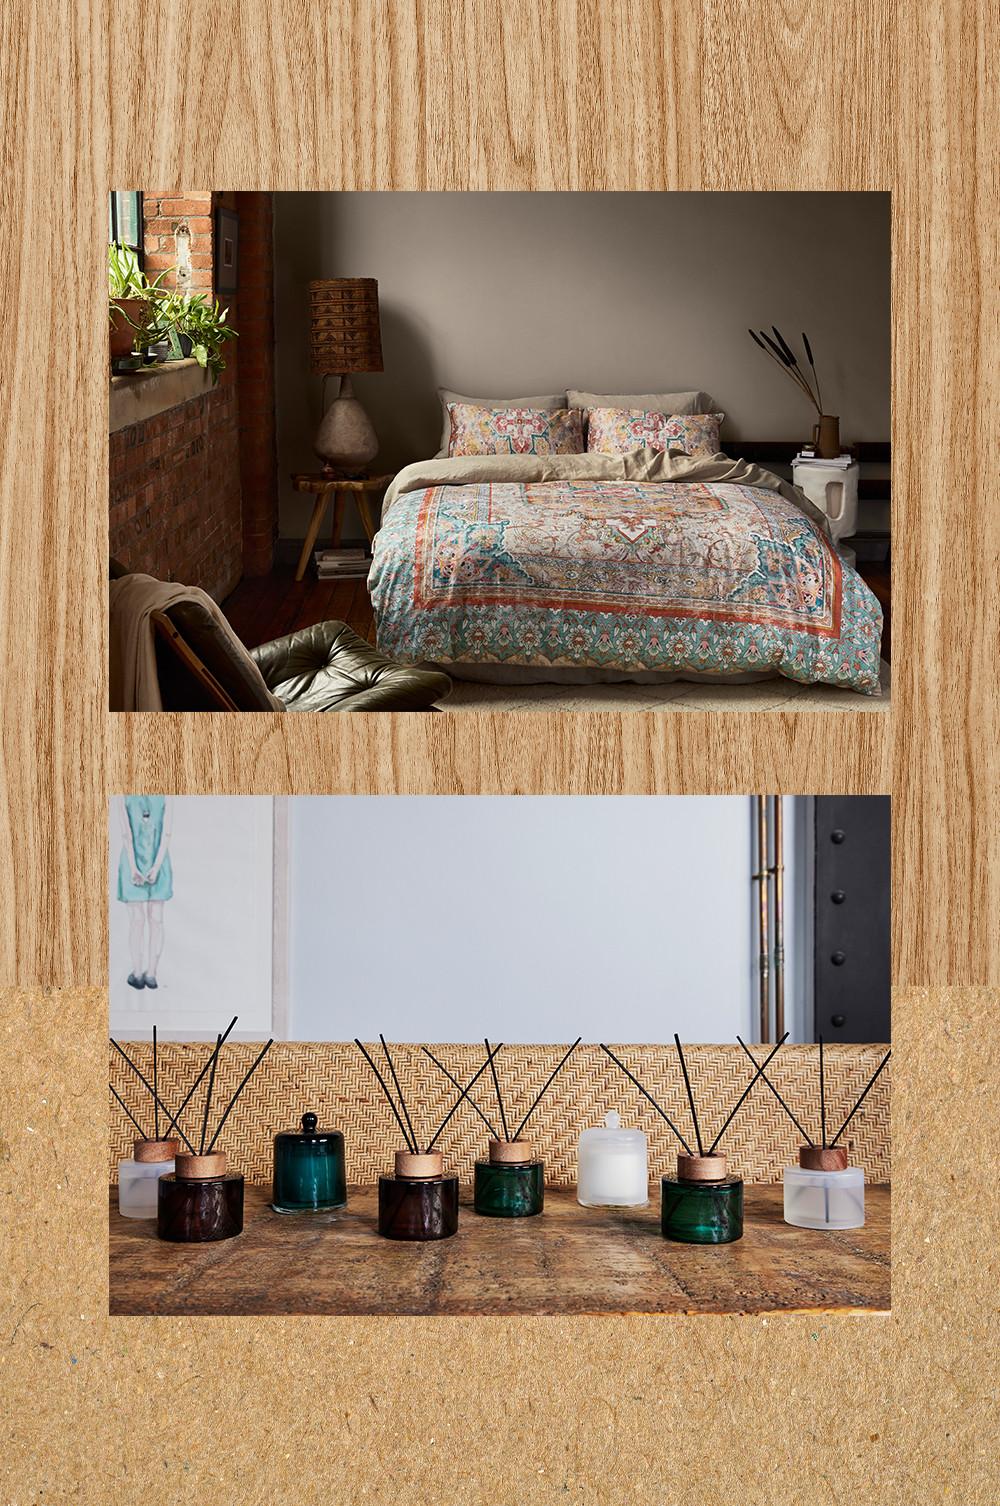 Interiors image with bedroom and room diffusers